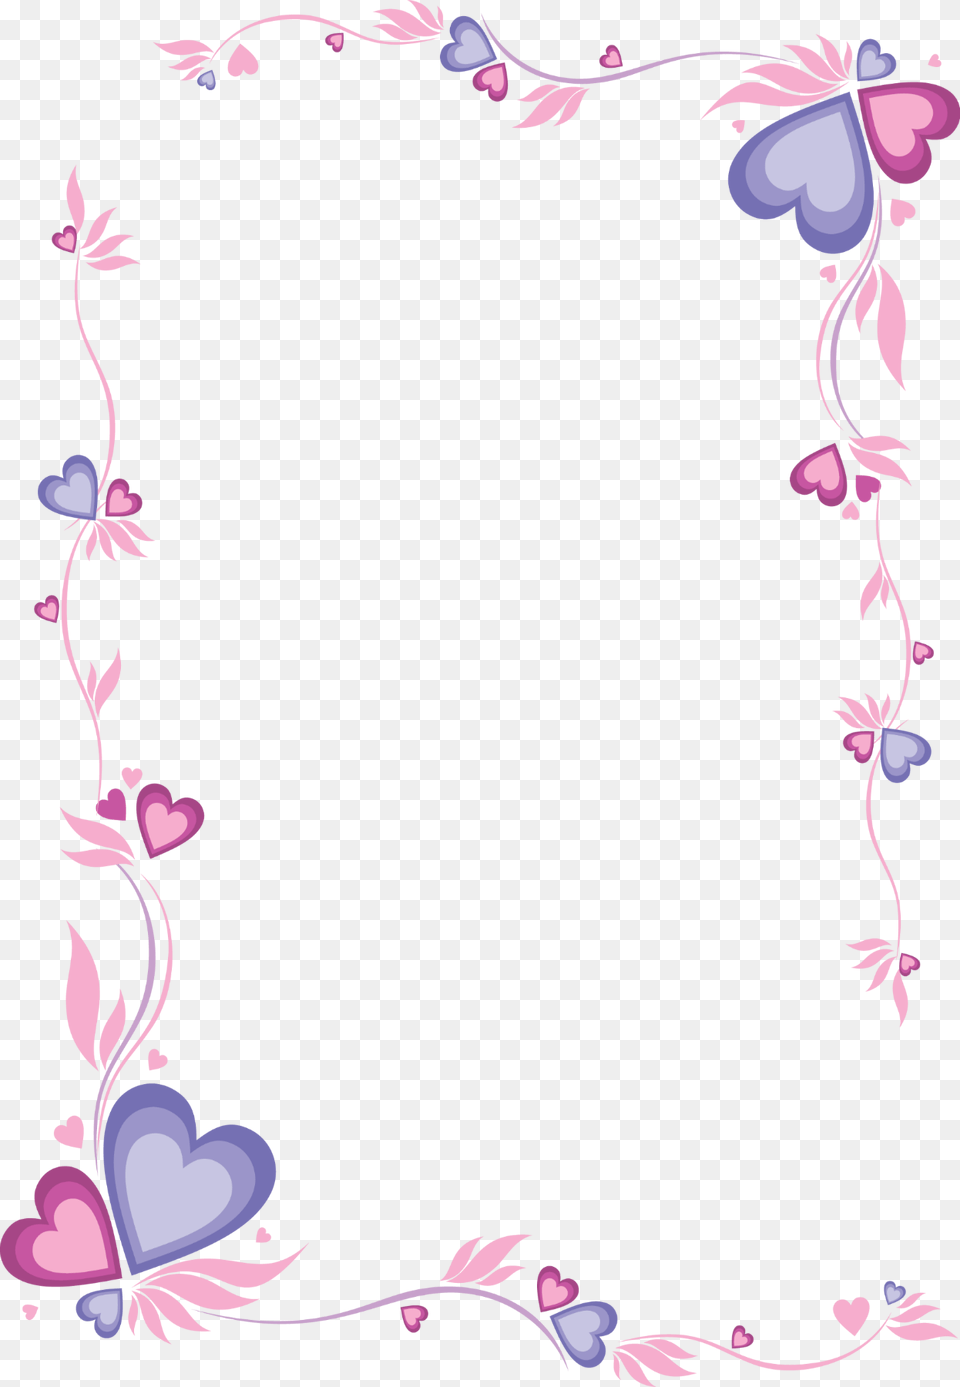 Photo Effect From Category Marcos Para Una Hoja De Word, Art, Floral Design, Graphics, Pattern Png Image